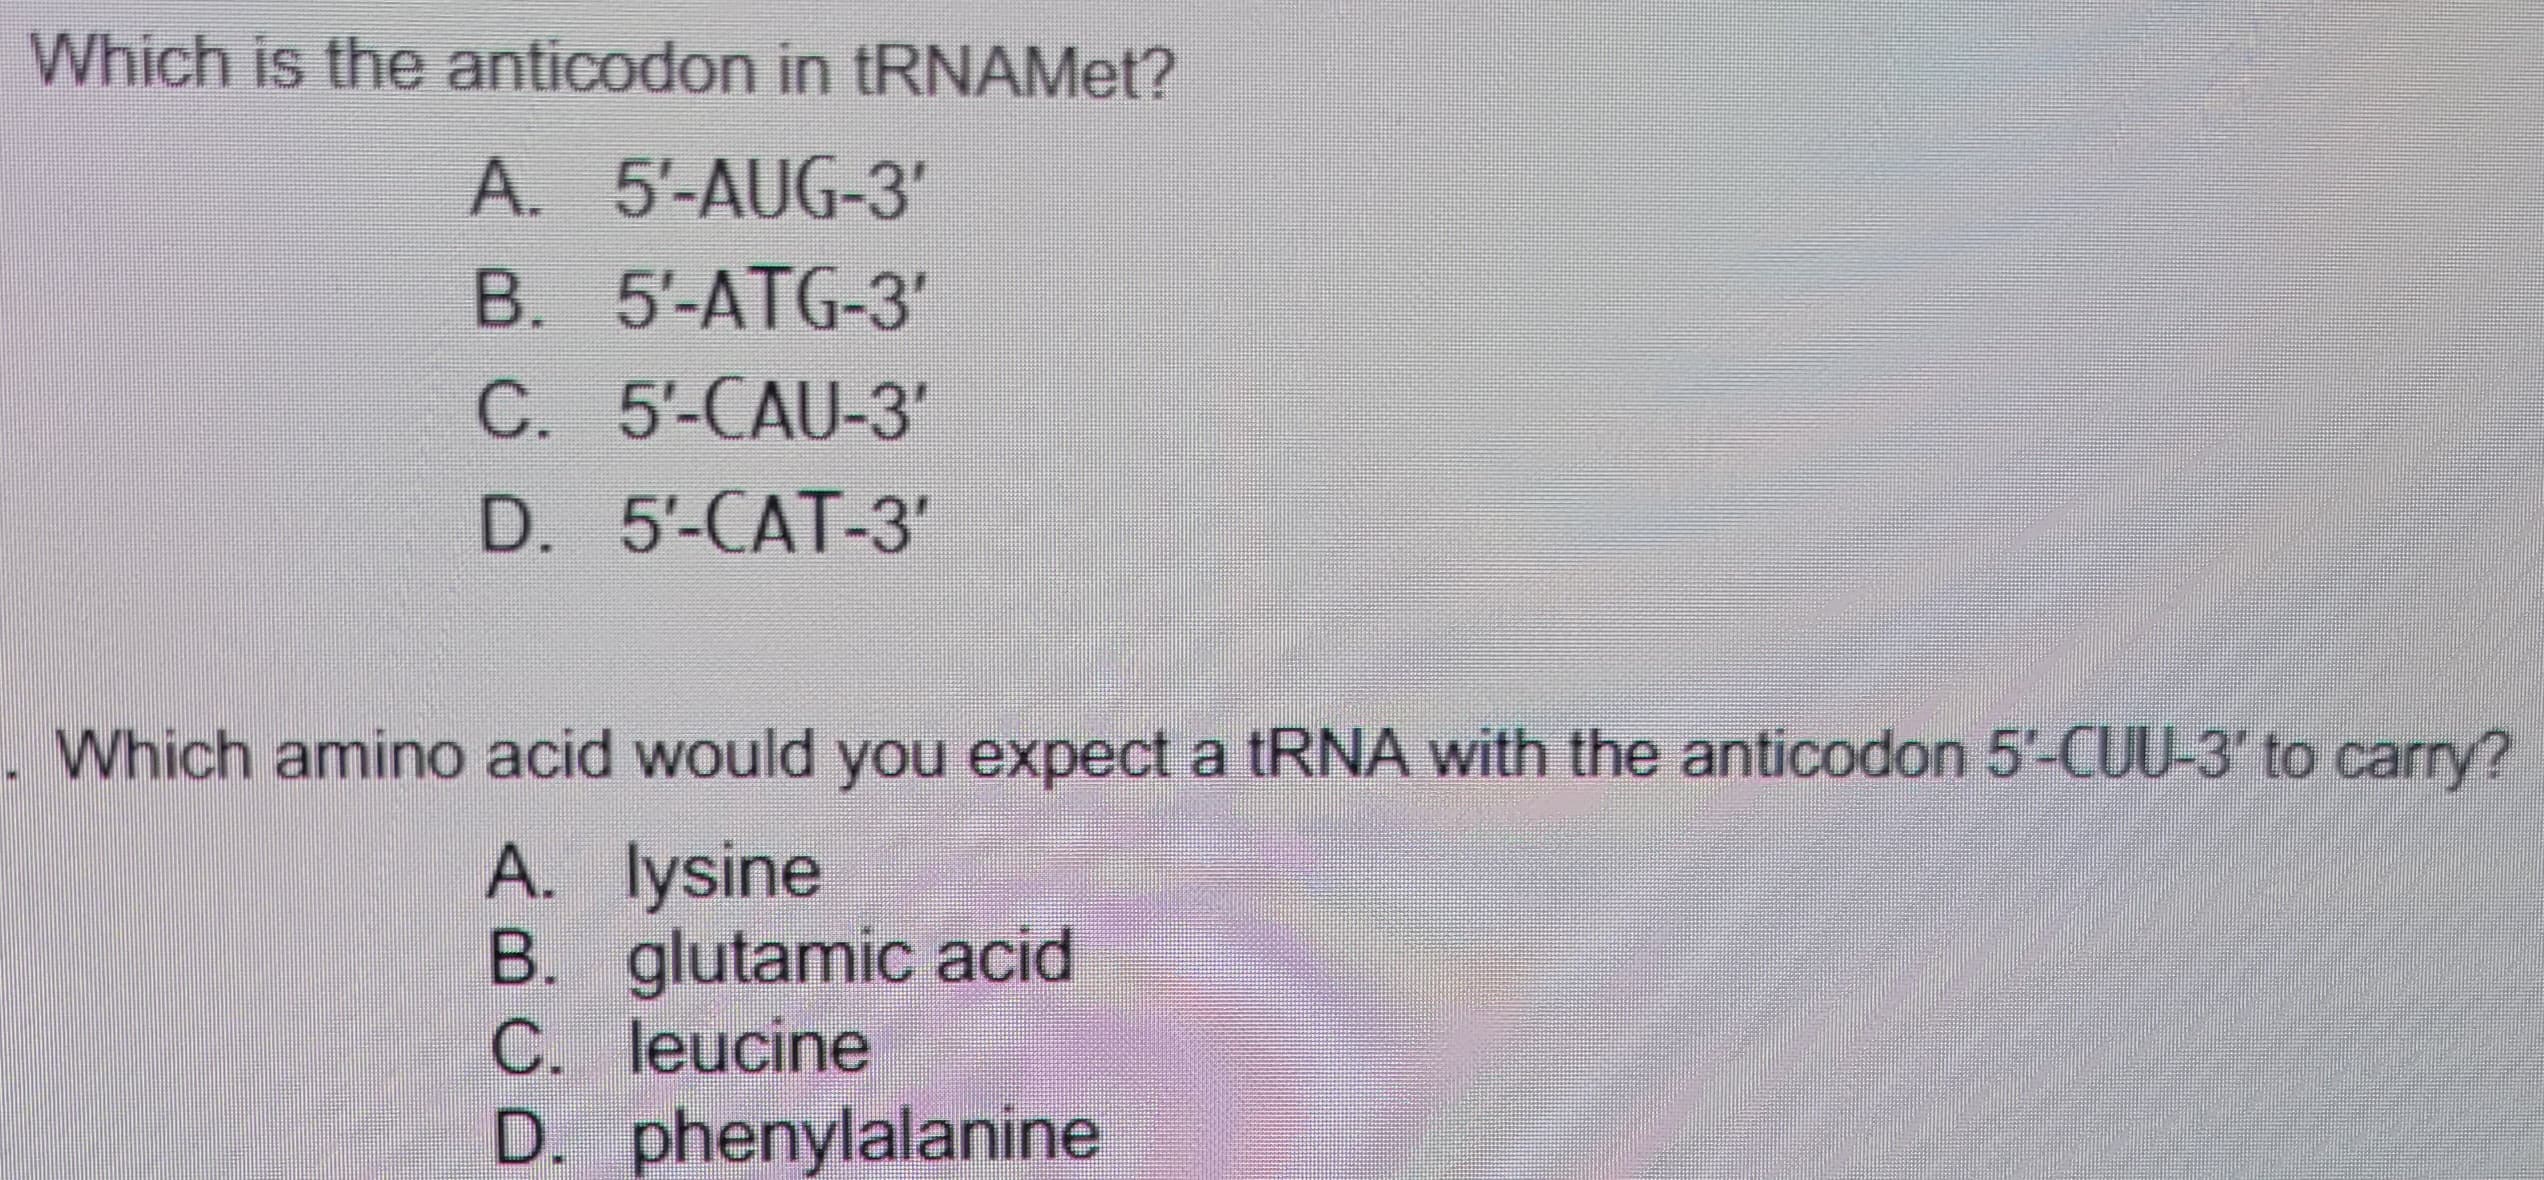 Which is the anticodon in tRNAMet?
A. 5'-AUG-3'
B. 5-ATG-3
C. 5'-CAU-3'
D. 5'-CAT-3'
. Which amino acid would you expect a tRNA with the anticodon 5'-CUU-3' to carry?
A. lysine
B. glutamic acid
C. leucine
D. phenylalanine